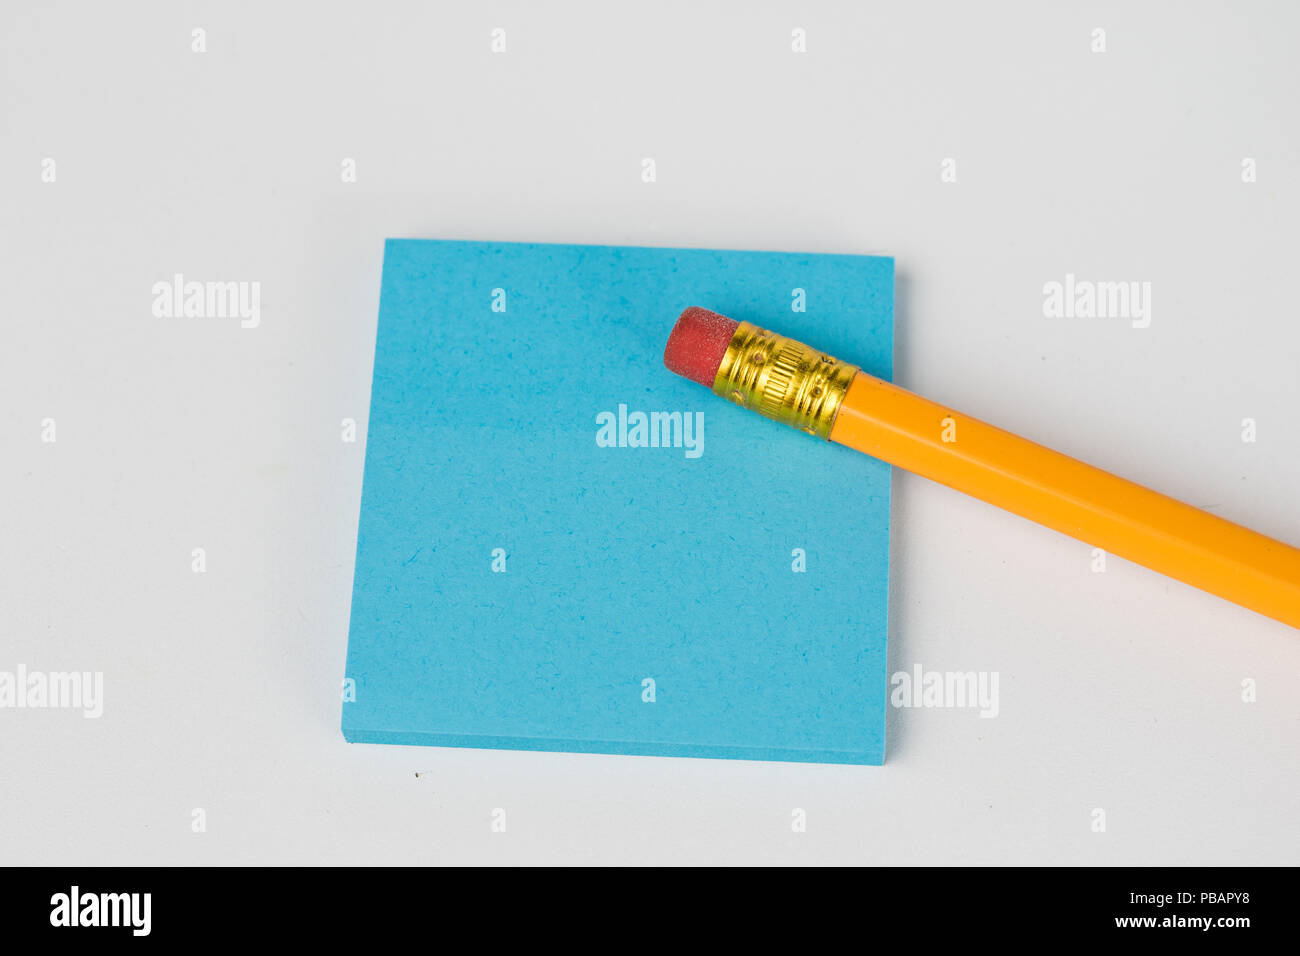 Pencil and sticky notes on a white table. Office accessories for saving notes. White background. Stock Photo